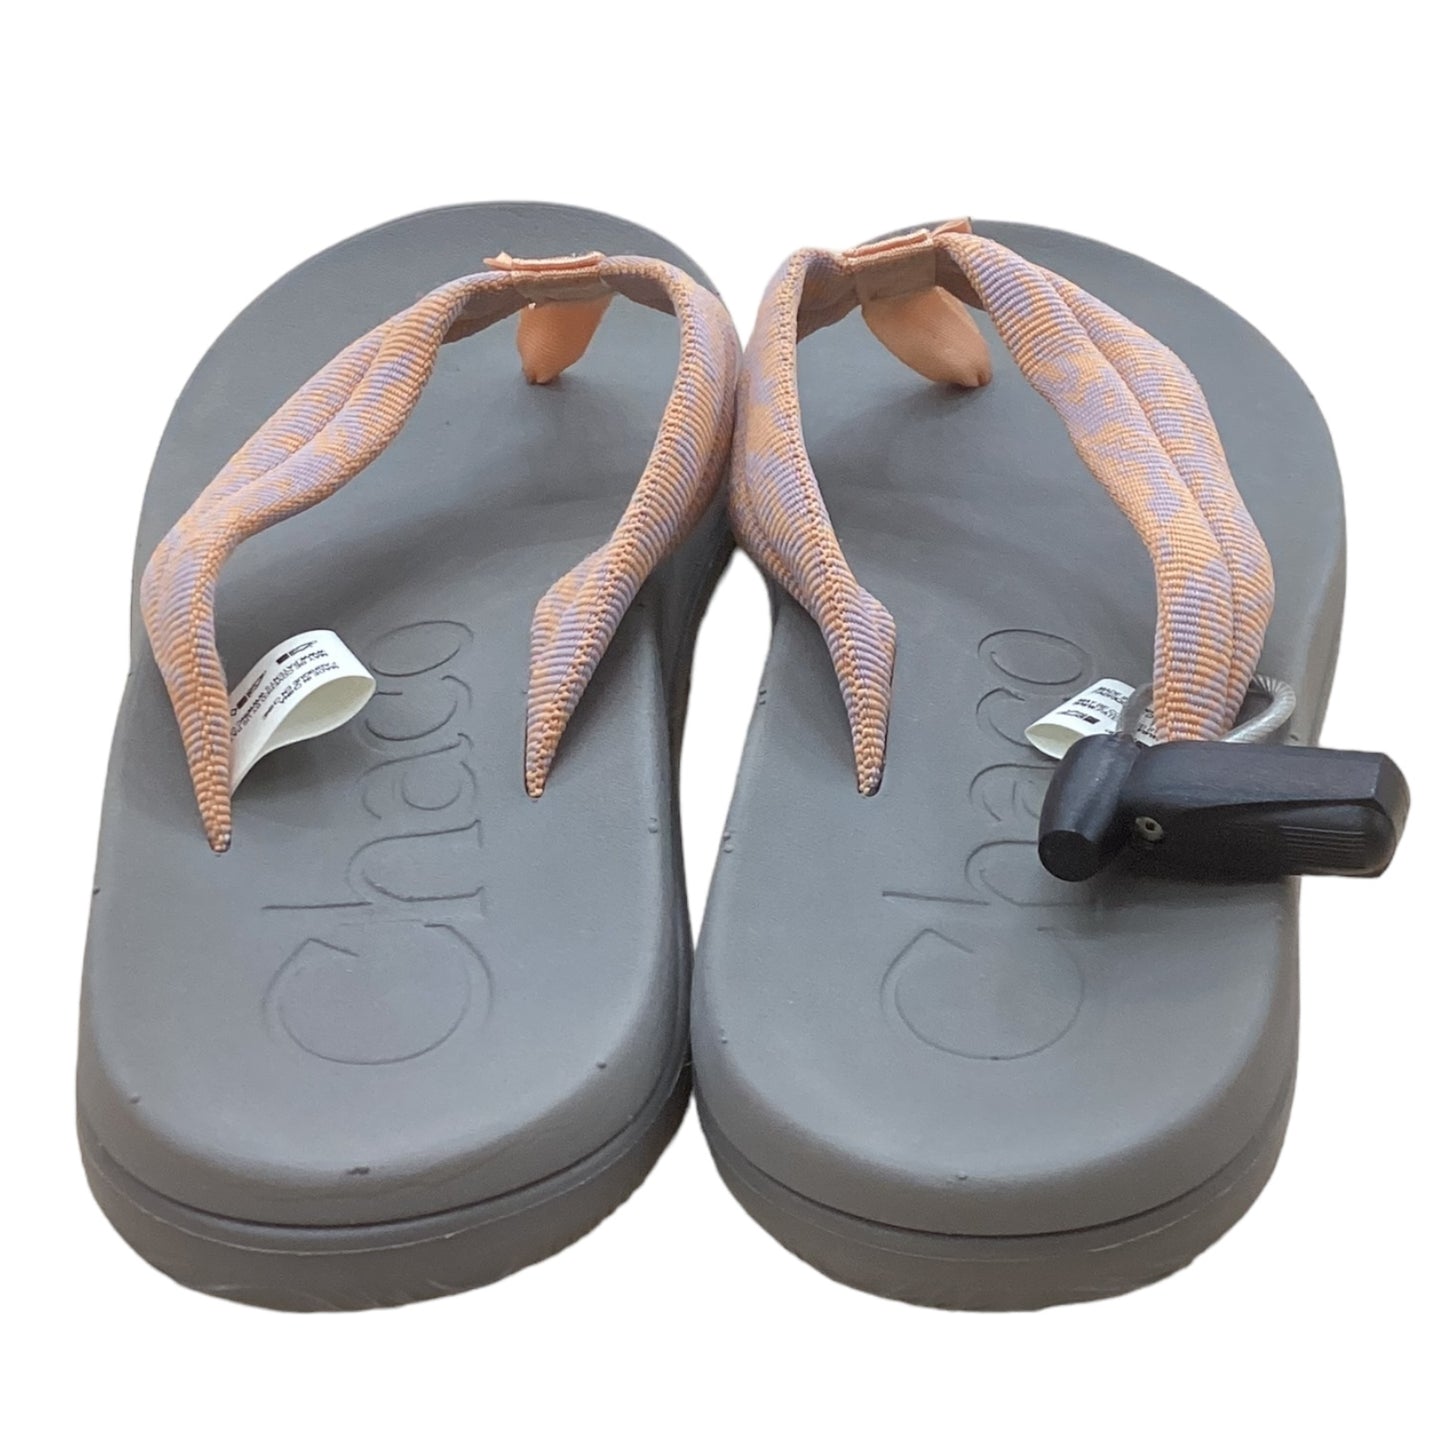 Sandals Flip Flops By Chacos  Size: 8